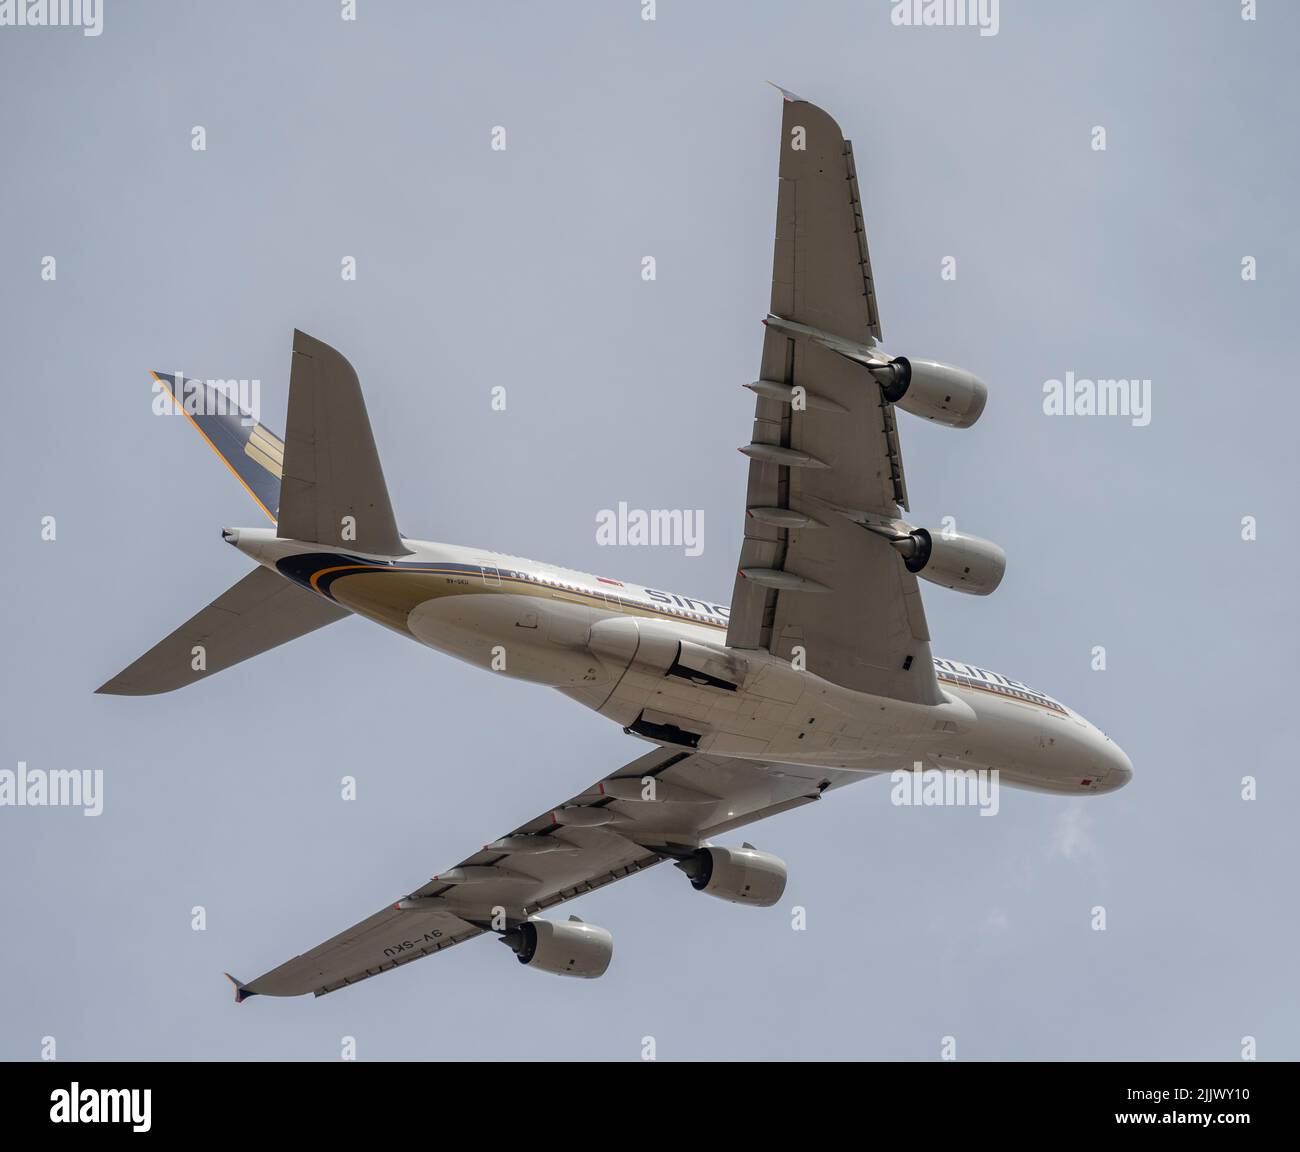 Heathrow Airport, London, UK. 28 July 2022. Singapore Airlines Airbus A380 9V-SKU taking off from Southern runway at Heathrow on London to Singapore route. Stock Photo